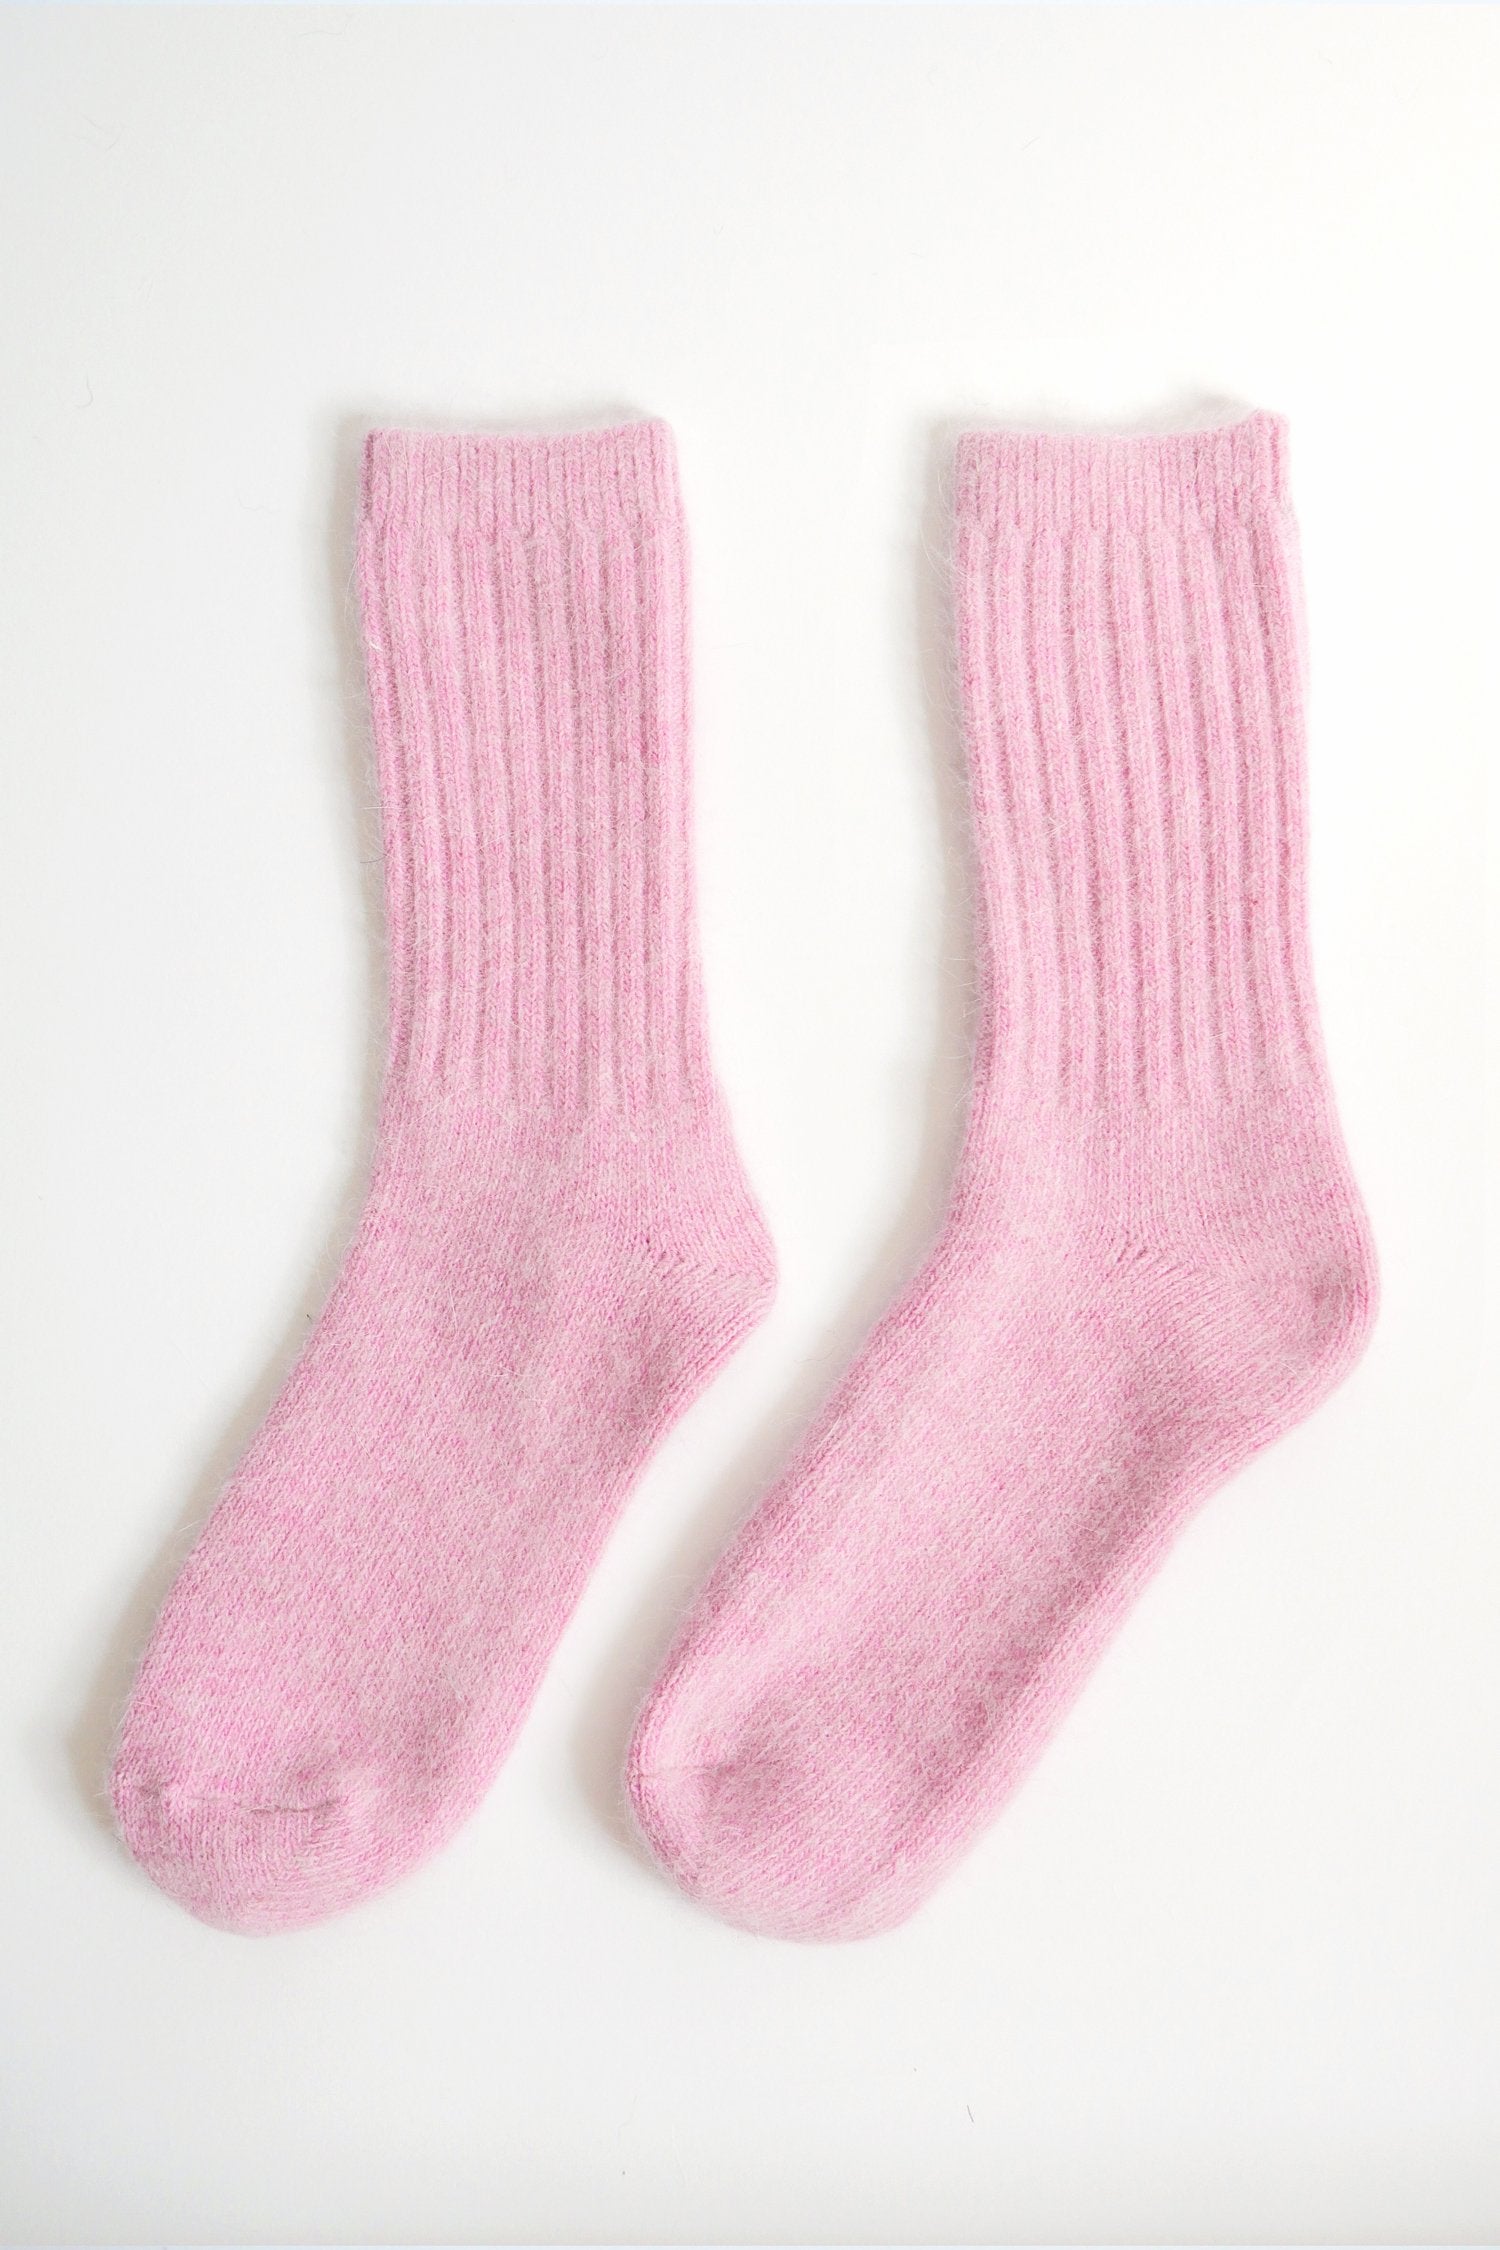 Skies For Miles soft Angora wool socks in pink color